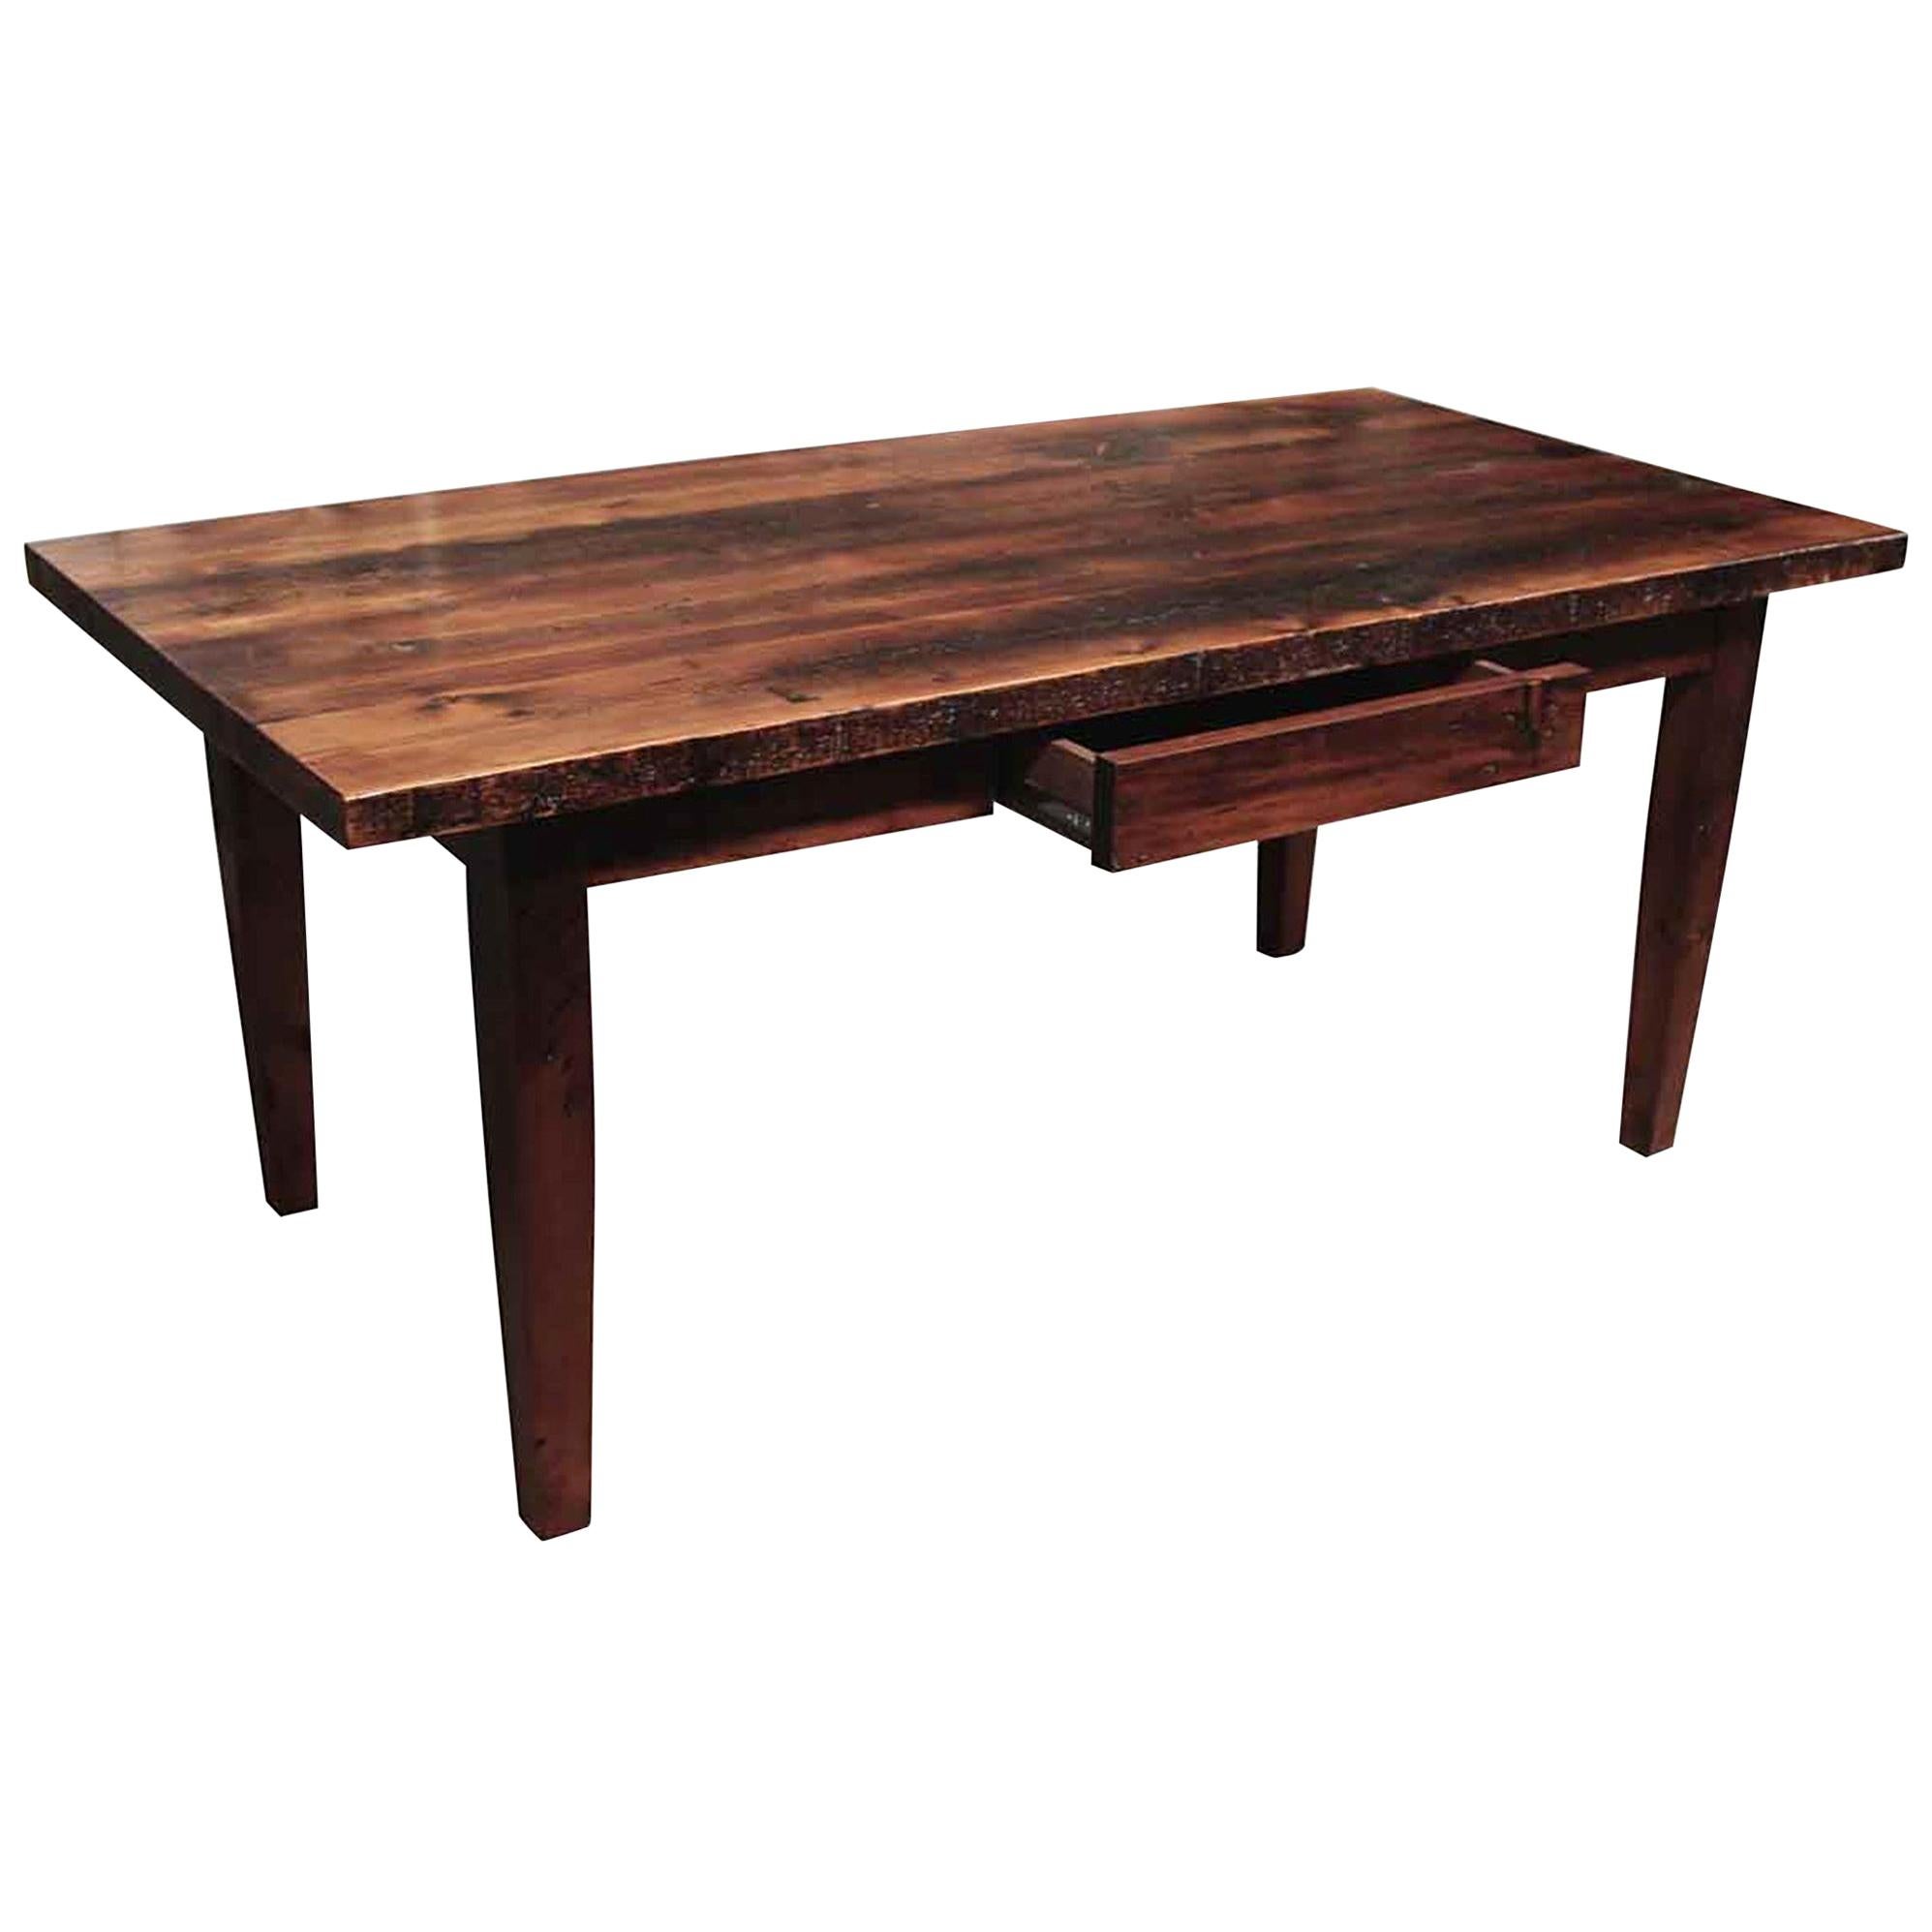 Pine Farm Table with One Drawer and Tapered Legs Done in a Provincial Stain